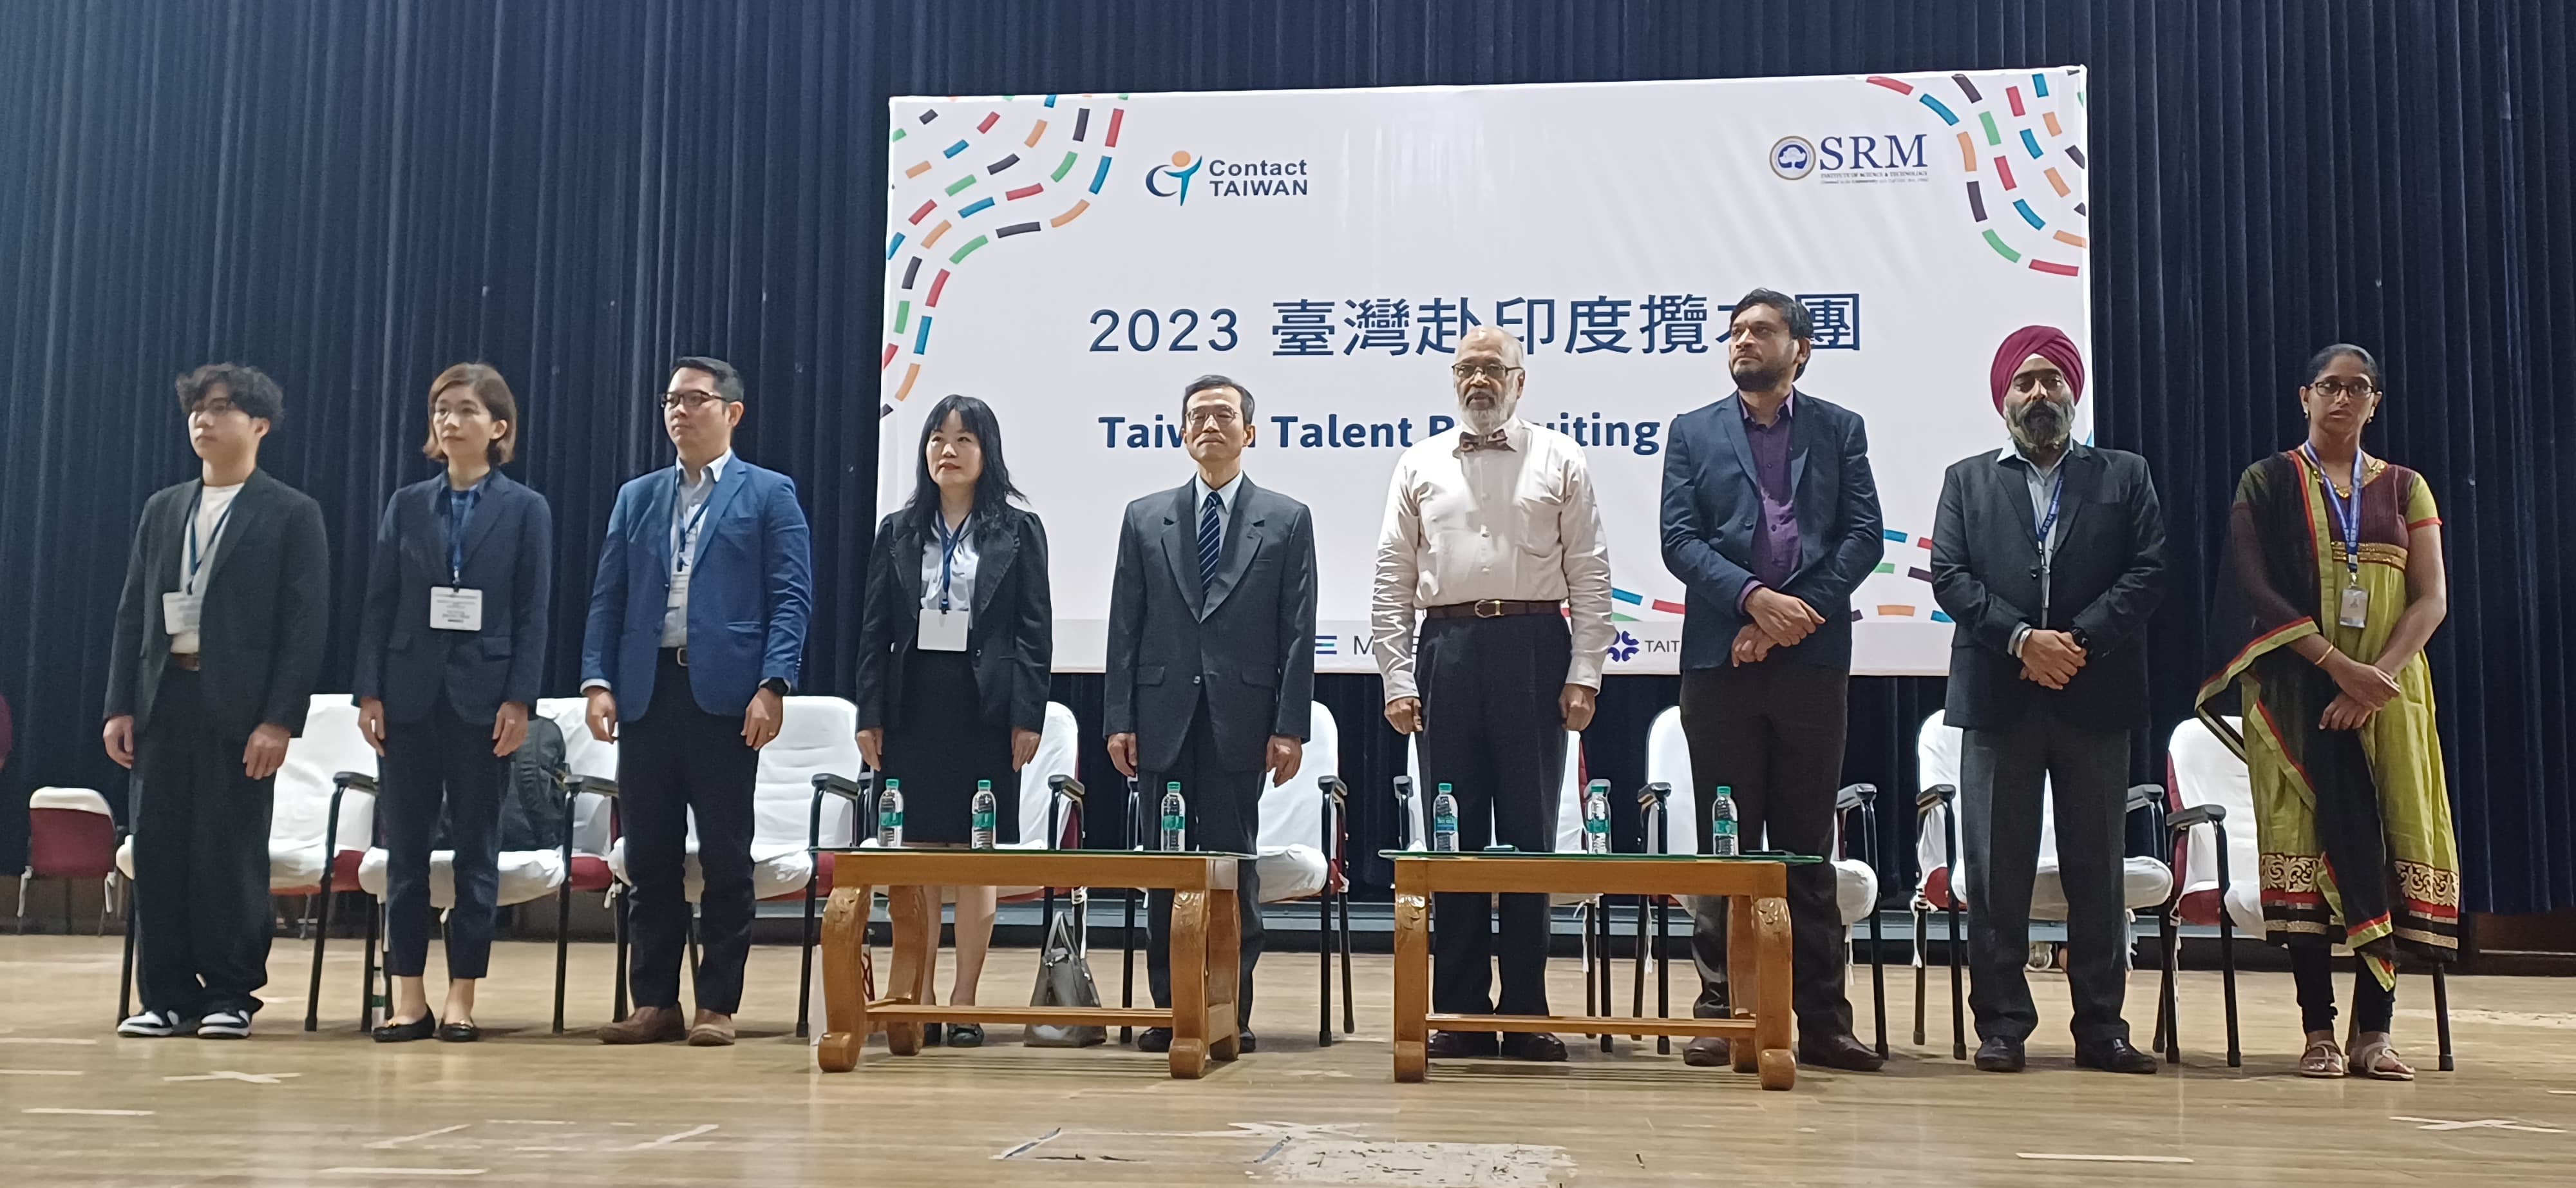 Eight leading Taiwan companies make offers to SRM students